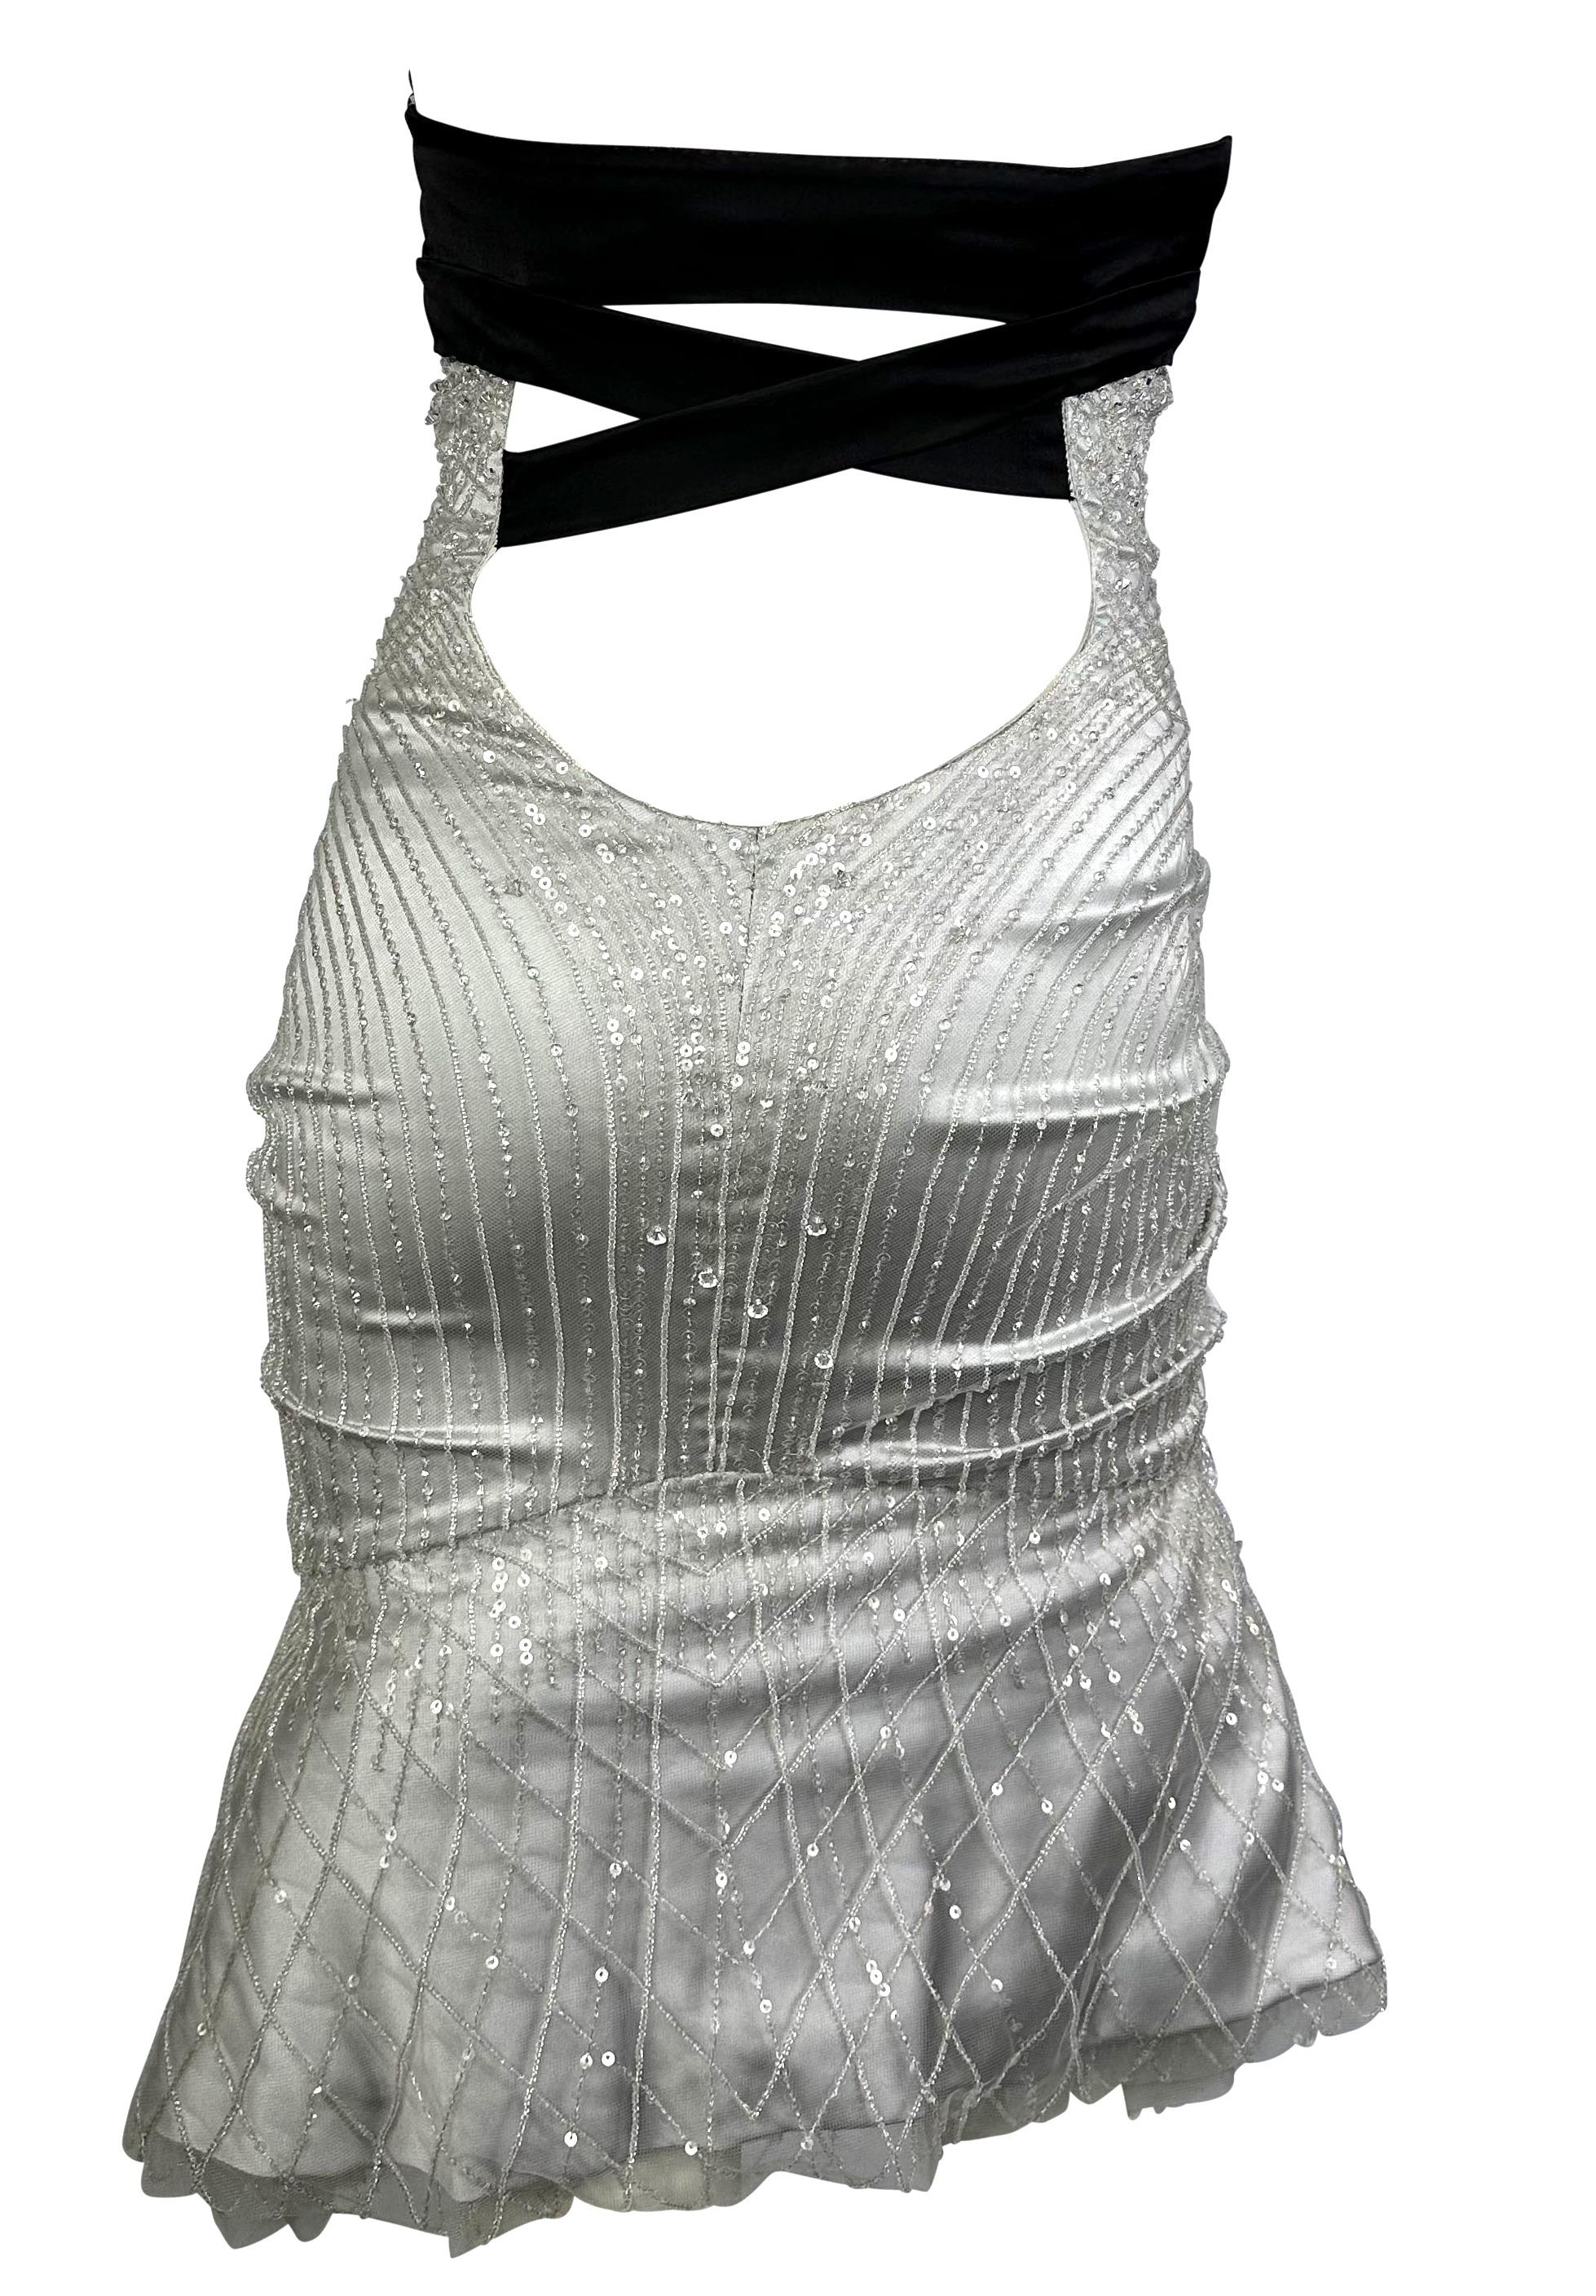 NWT F/W 2005 Gucci Runway Silver Crystal Beaded Bustier Flare Mini Dress In Excellent Condition For Sale In West Hollywood, CA